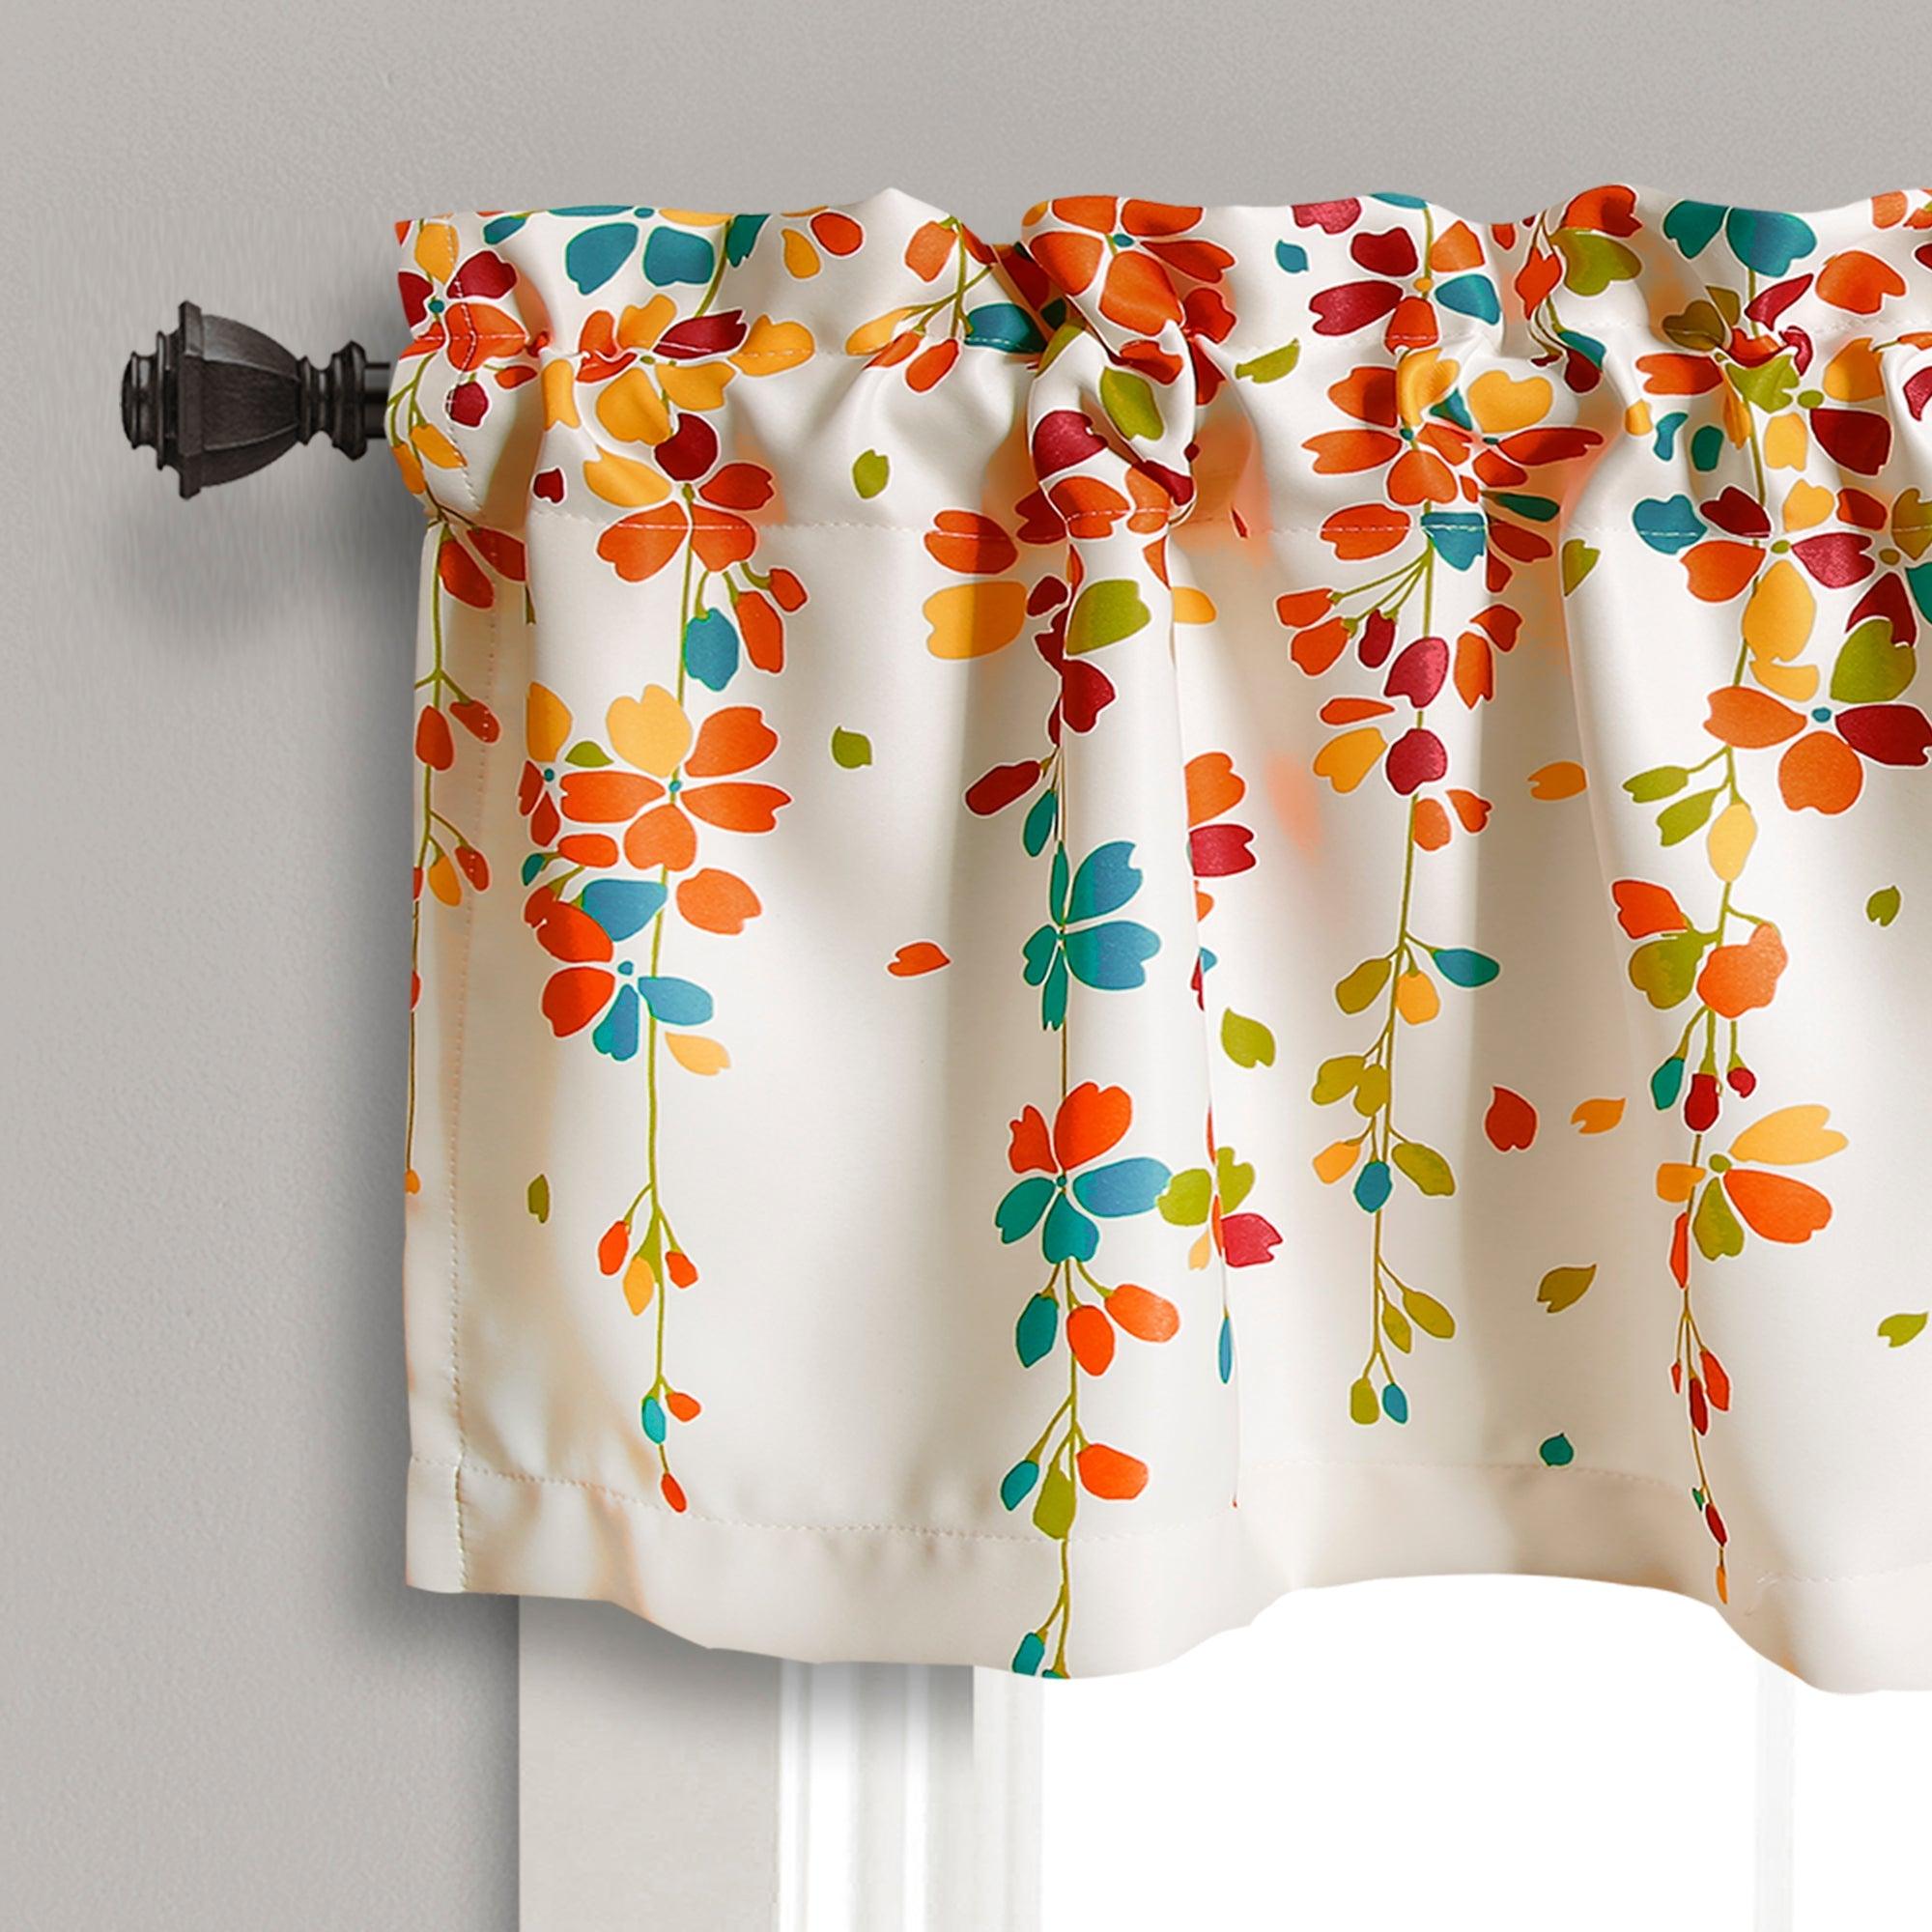 Weeping Flower Valance